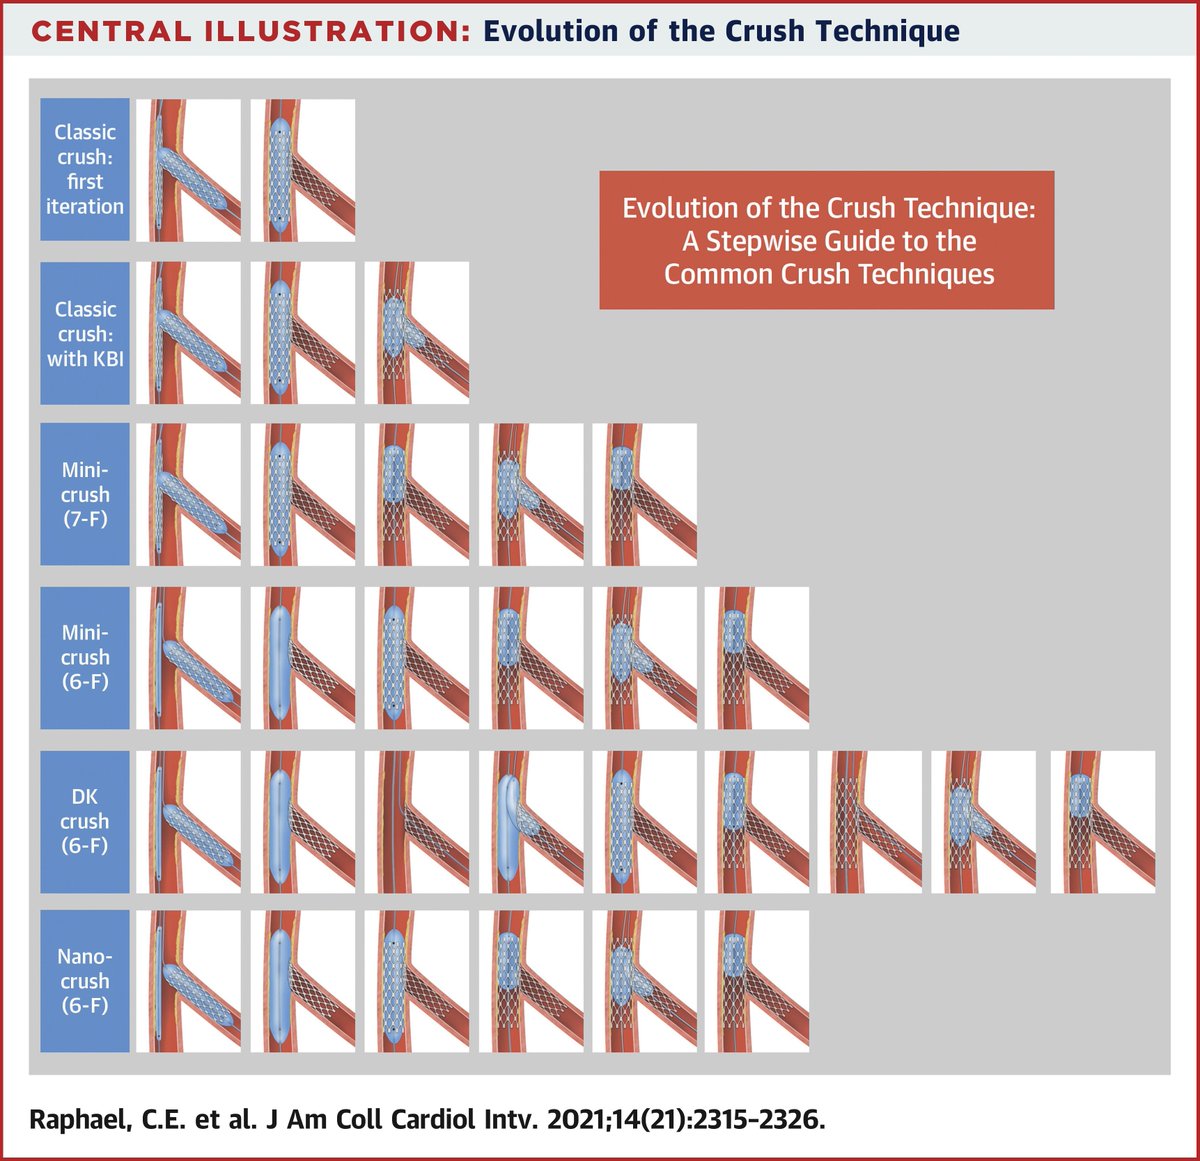 New #JACCINT issue is out! Classic crush, Mini-crush, DK-crush and Nano-crush: How did the crush techniques in bifurcation #PCI evolve w/ time? What are the outcomes of the different crush techniques? Read more in this state-of-the art review: bit.ly/3pZ8tXU #ACCIntl